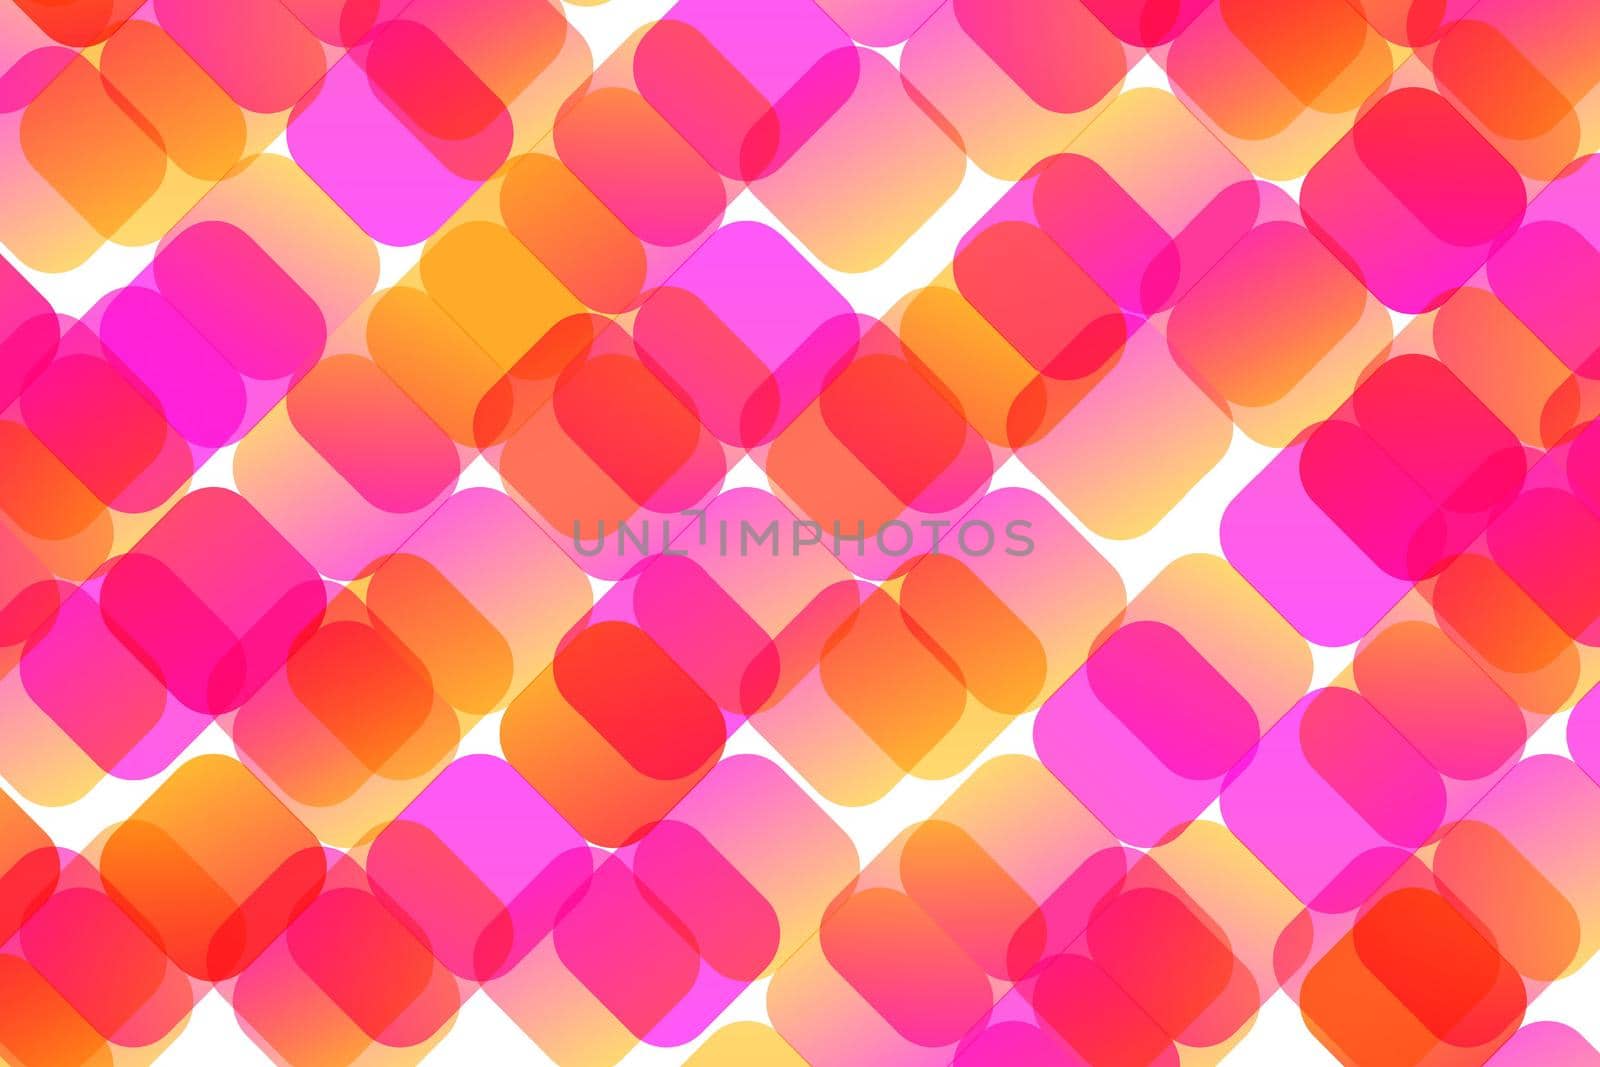 Futuristic cover design for notebook paper, copybook brochures, book, magazine, print. Colored pattern. Geometric abstract background with gradient multicolor elements.